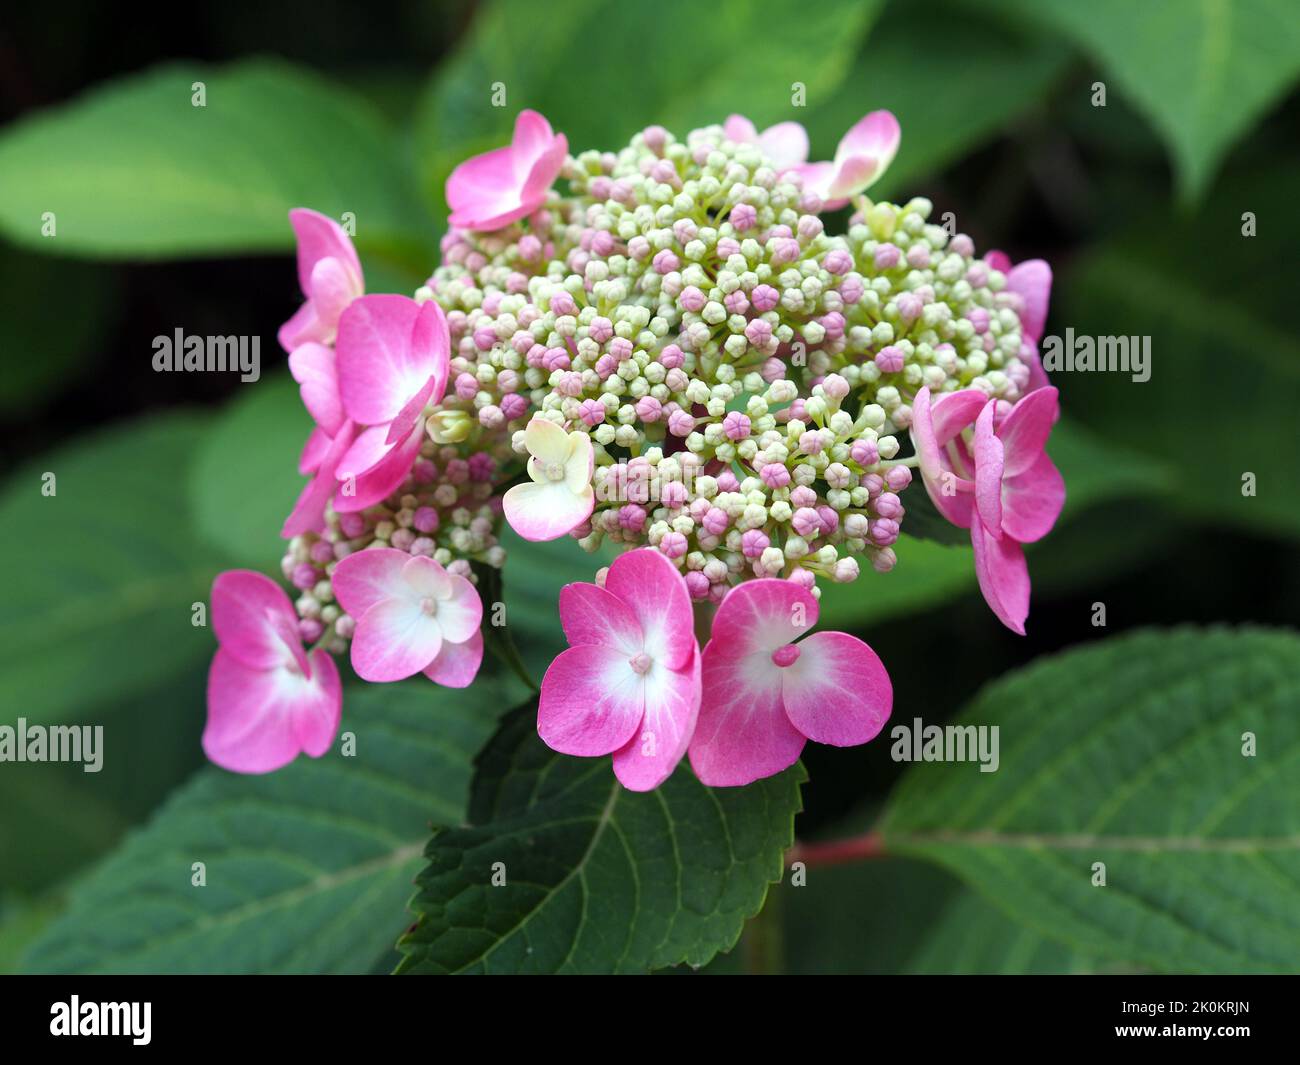 Wonderful pink and white flowers and buds of a hydrangea (Hydrangea macrophylla) in a garden in Ottawa, ON, Canada. Stock Photo